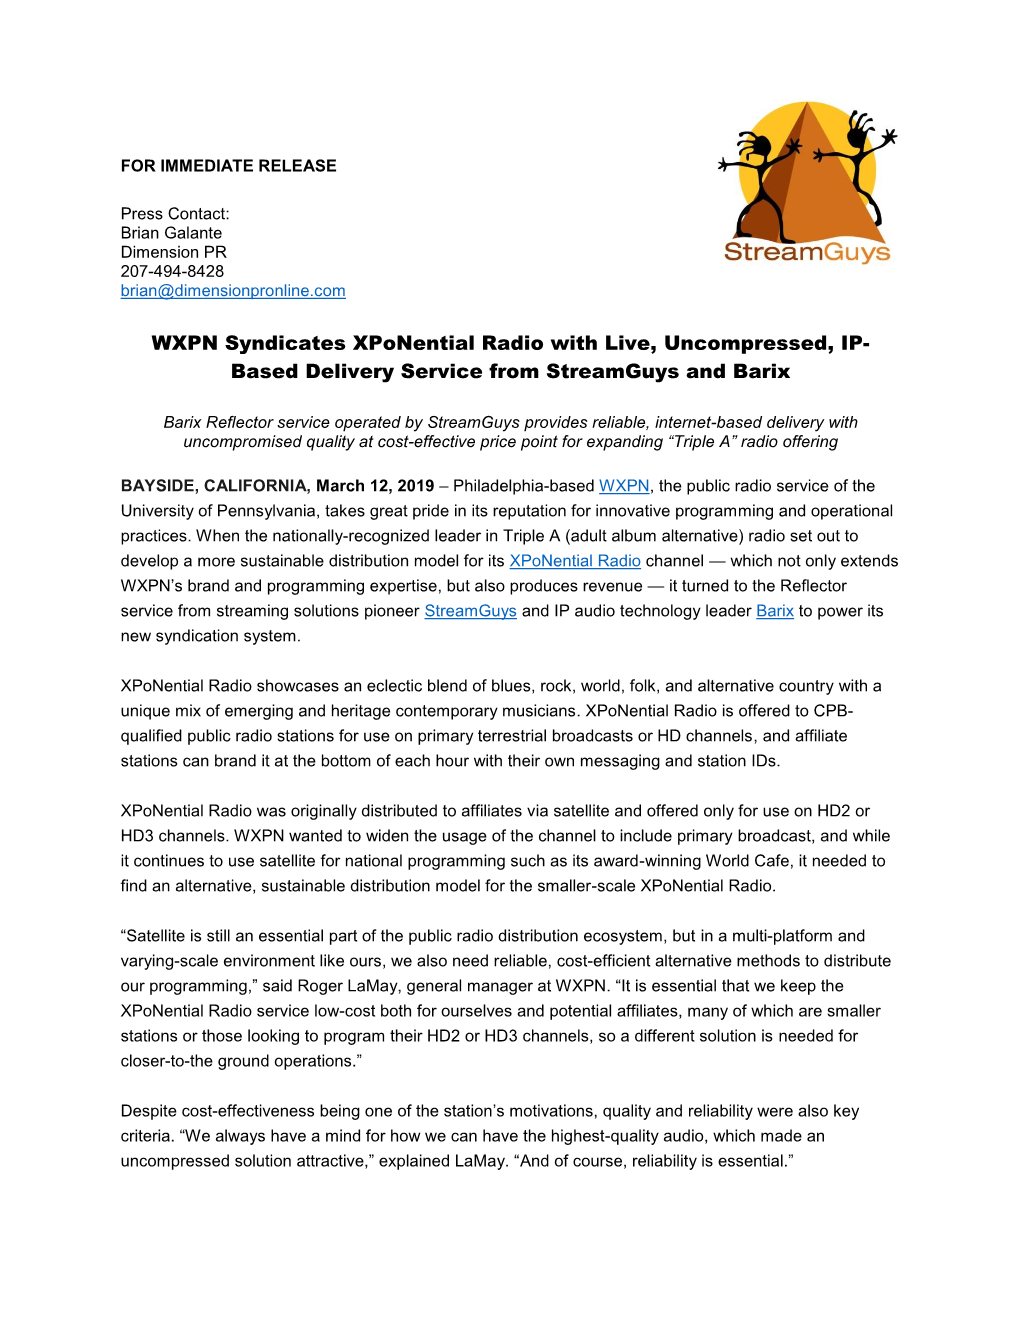 WXPN Syndicates Xponential Radio with Live, Uncompressed, IP- Based Delivery Service from Streamguys and Barix